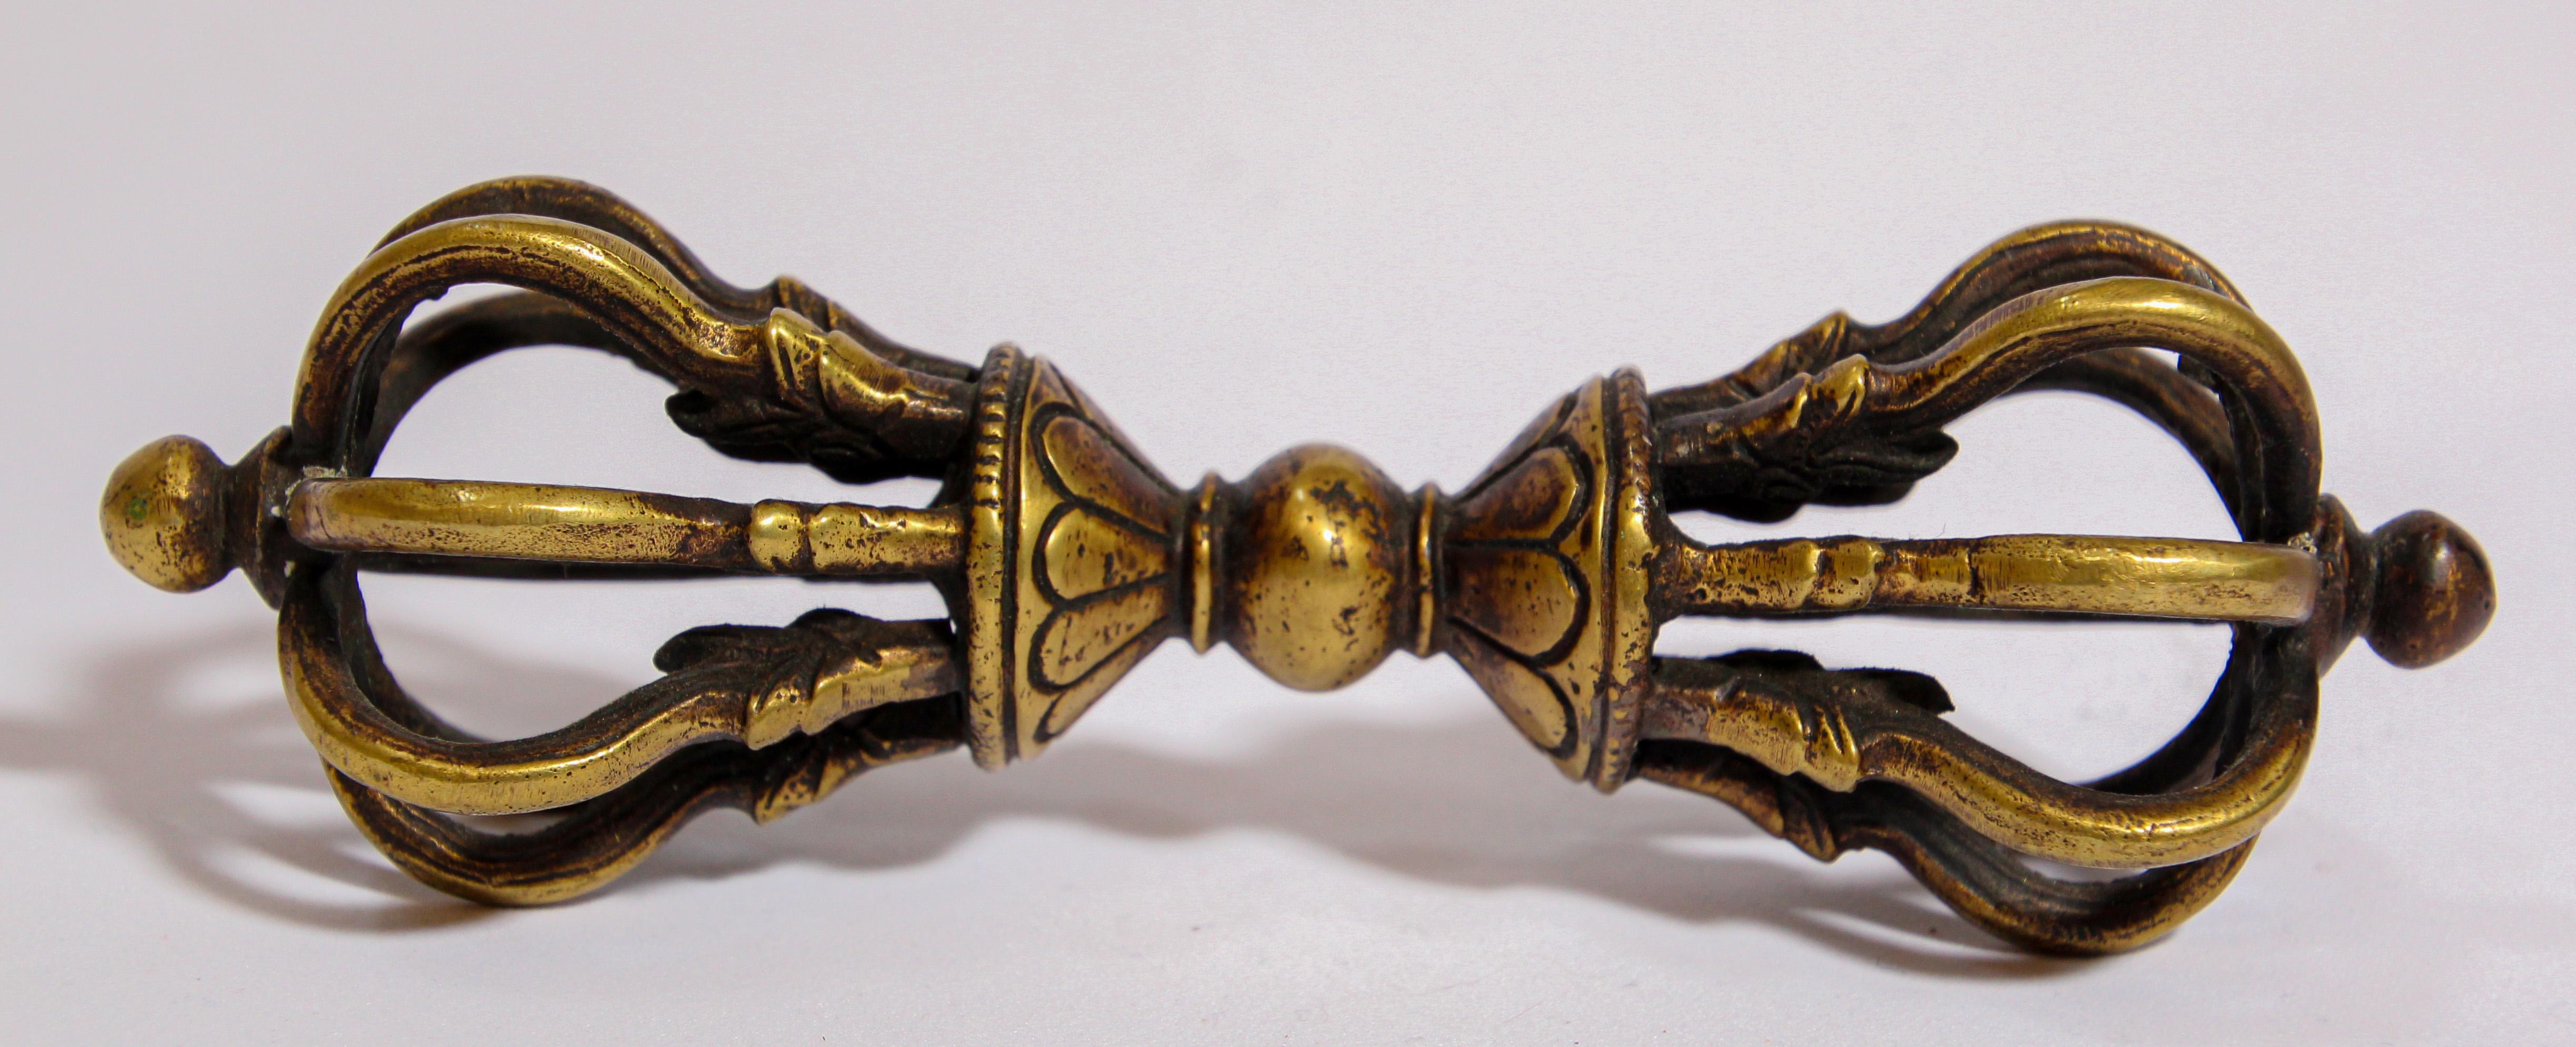 A Tibetan Buddhist gilded cast bronze Vajra
The gilt bronze Vajra thunderbolt-scepter is cast with a central bulbous grip that separates two lotus pedestals supporting a central column surrounded by eight arched vajra points emerging from the jaws